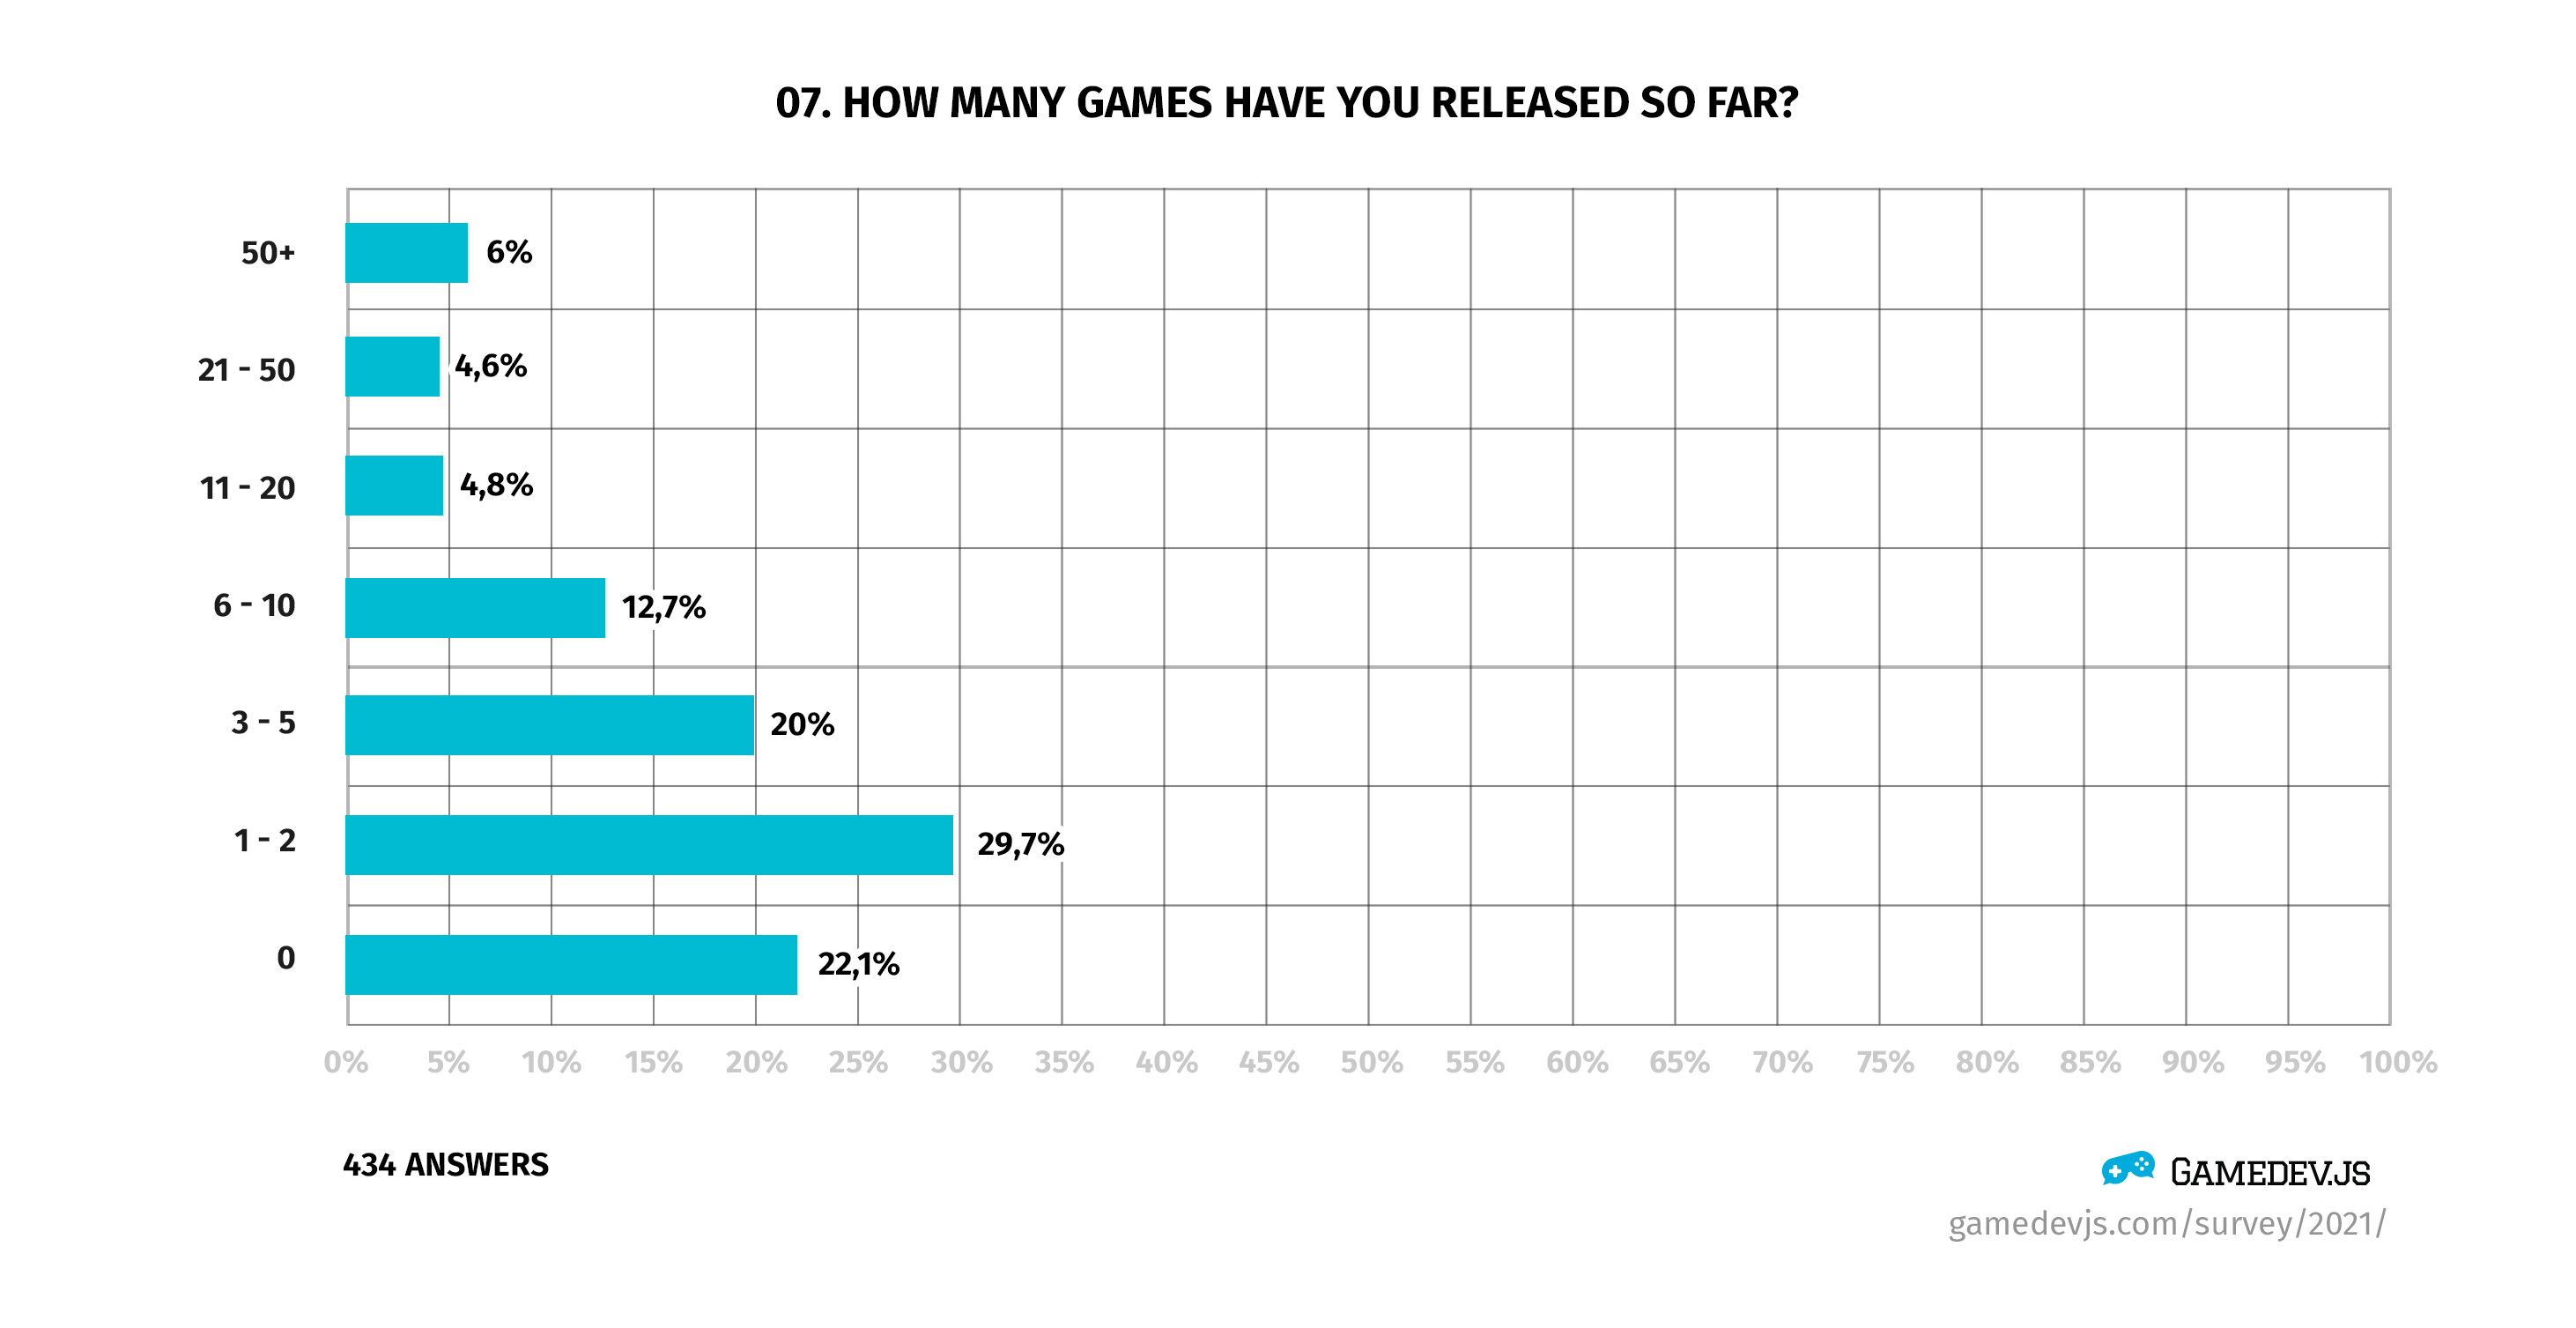 Gamedev.js Survey 2021 - Question #7: How many games have you released so far?